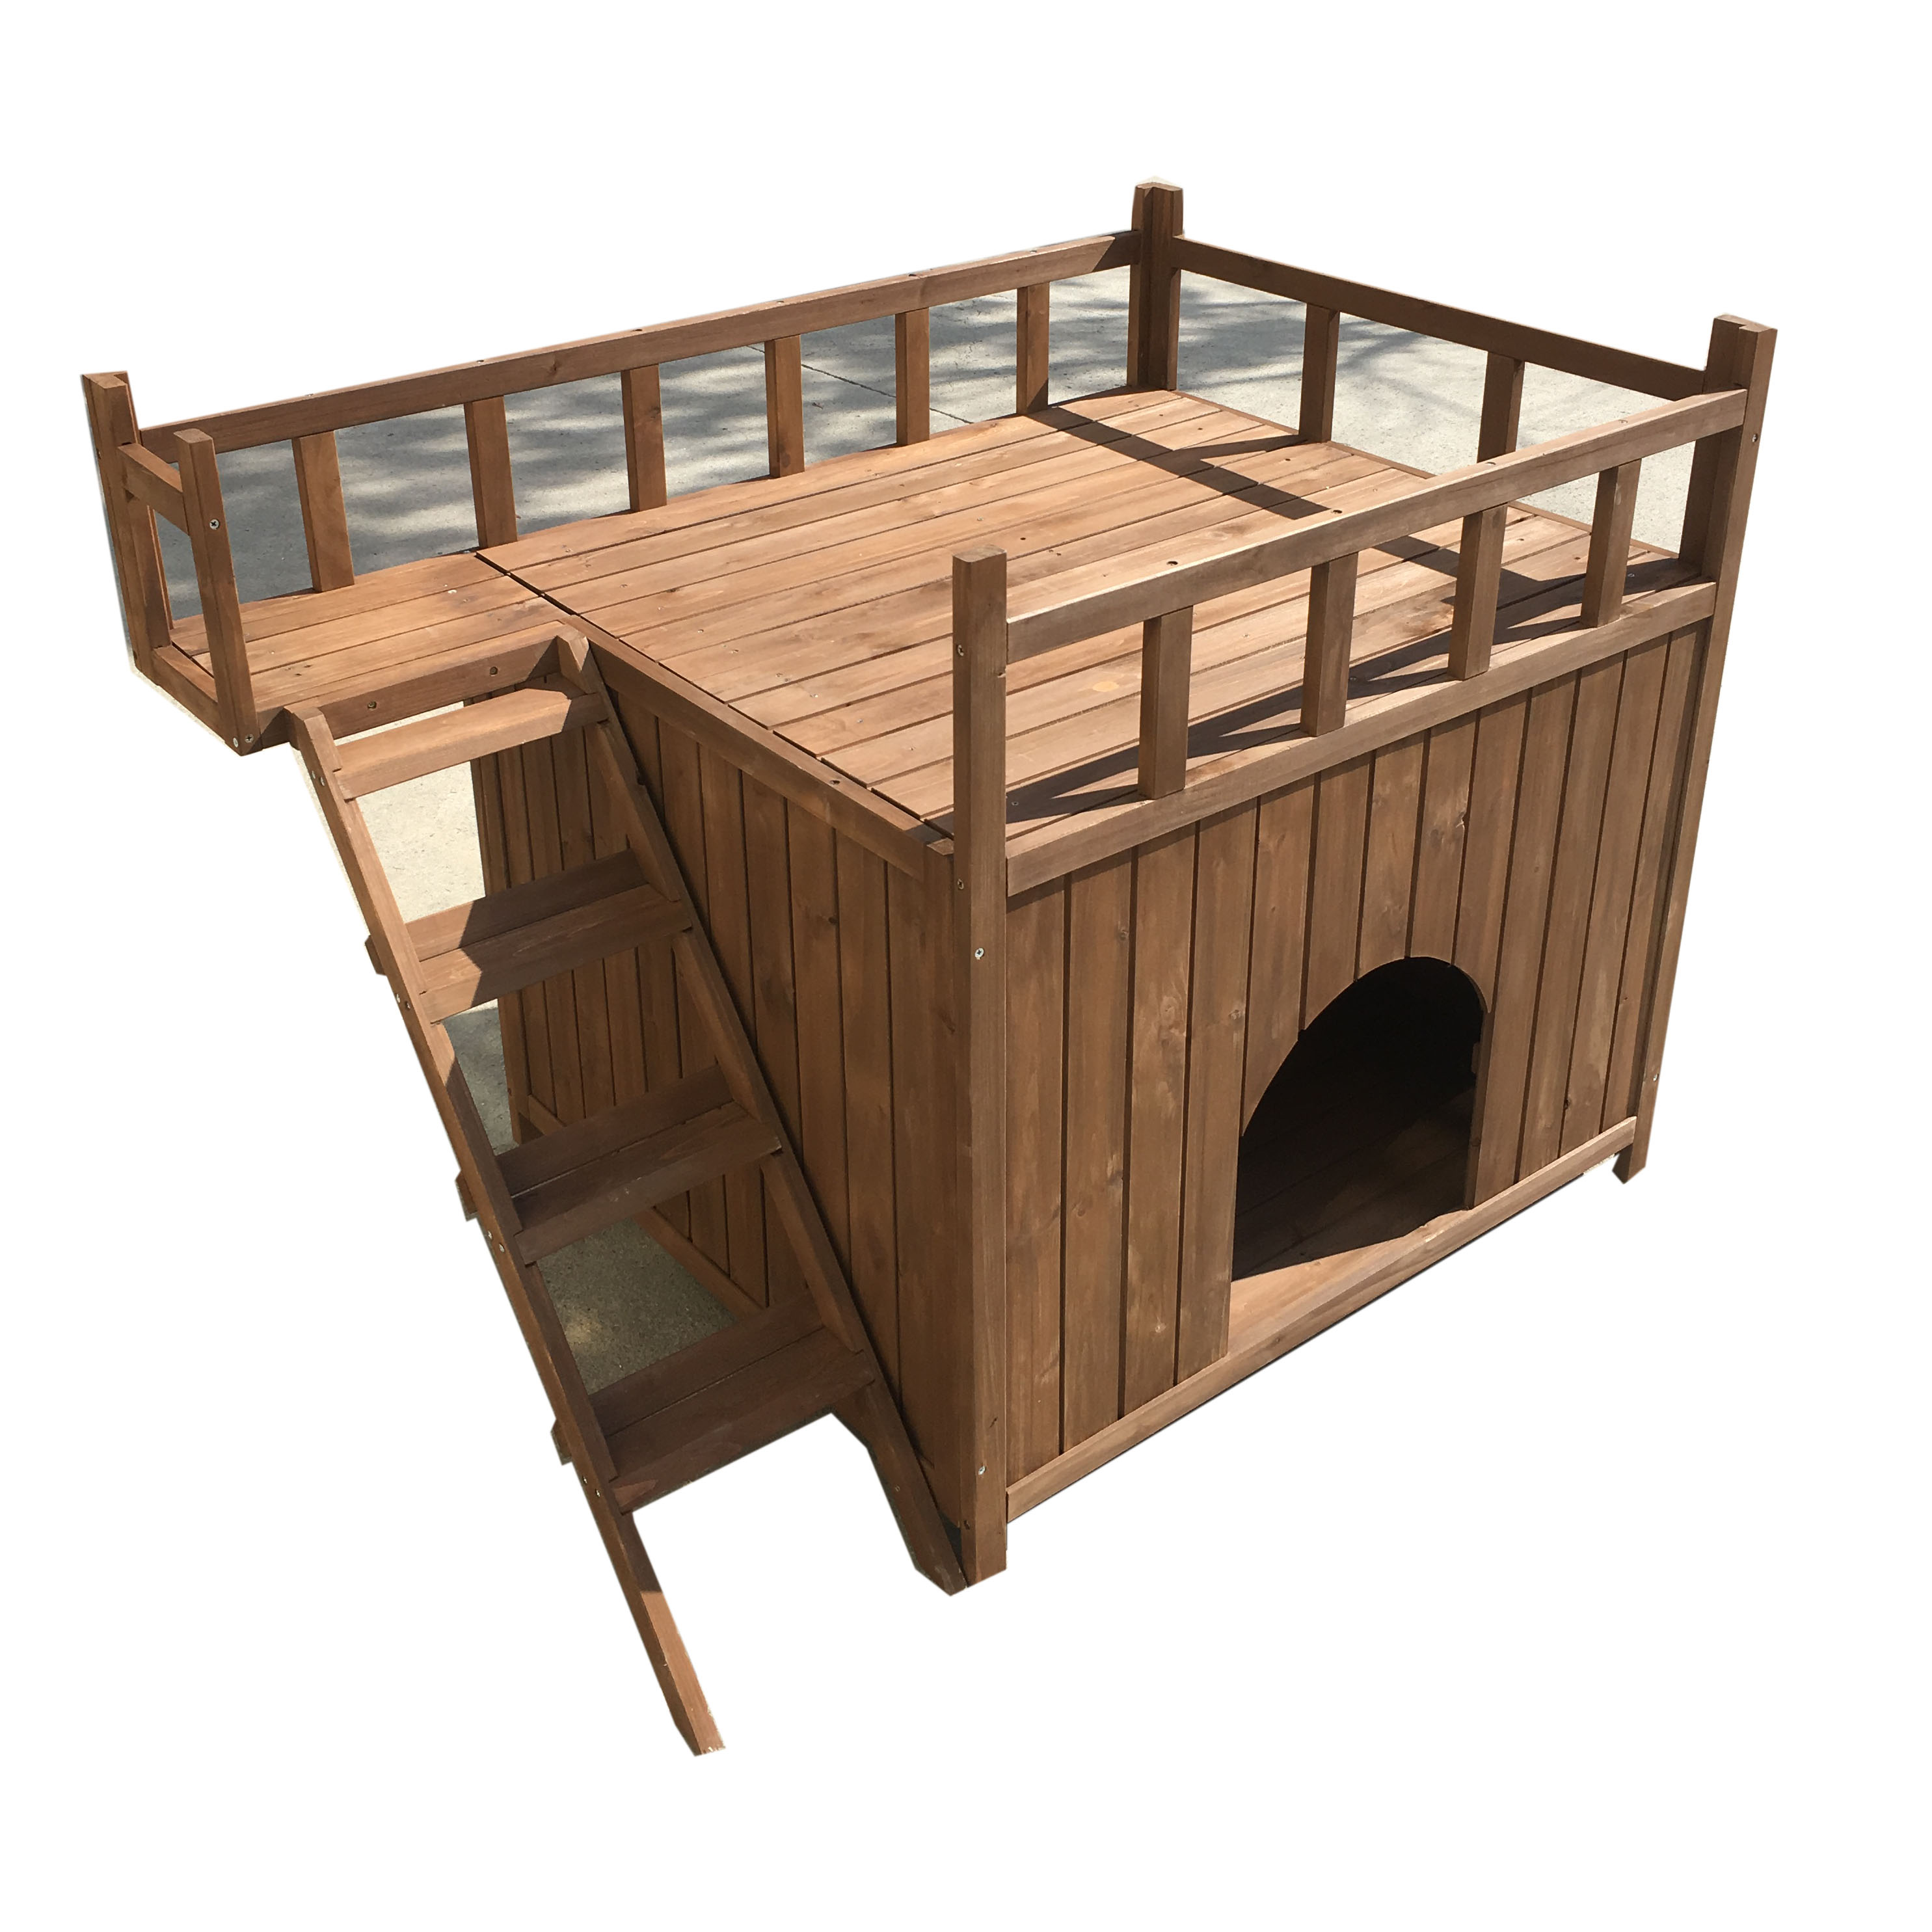 Raised Roof and Balcony Bed for Indoor and Outdoor Weather-Resistant cheap wooden decorative Dog cat houses